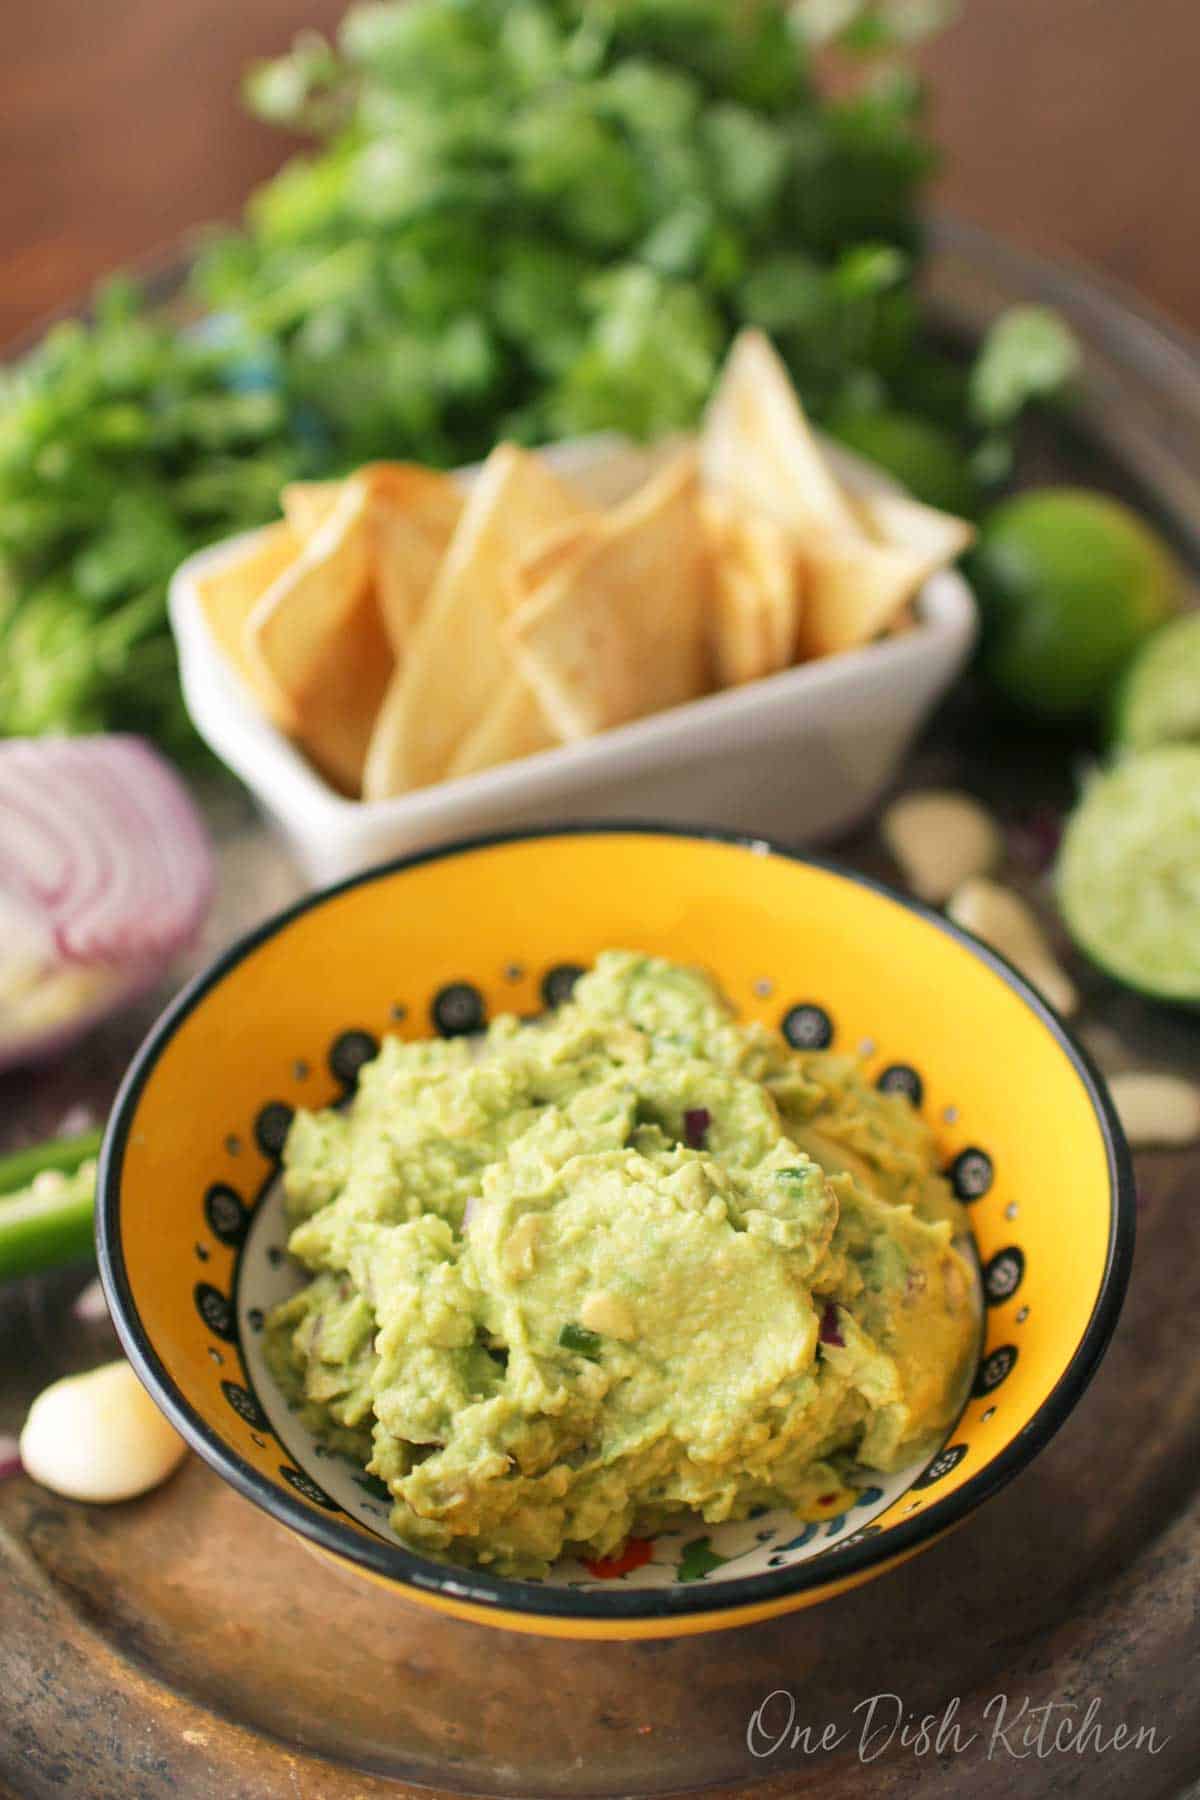 A small bowl of guacamole on a metal tray with a small bowl of homemade tortilla chips, an onion, garlic cloves, limes, and cilantro.